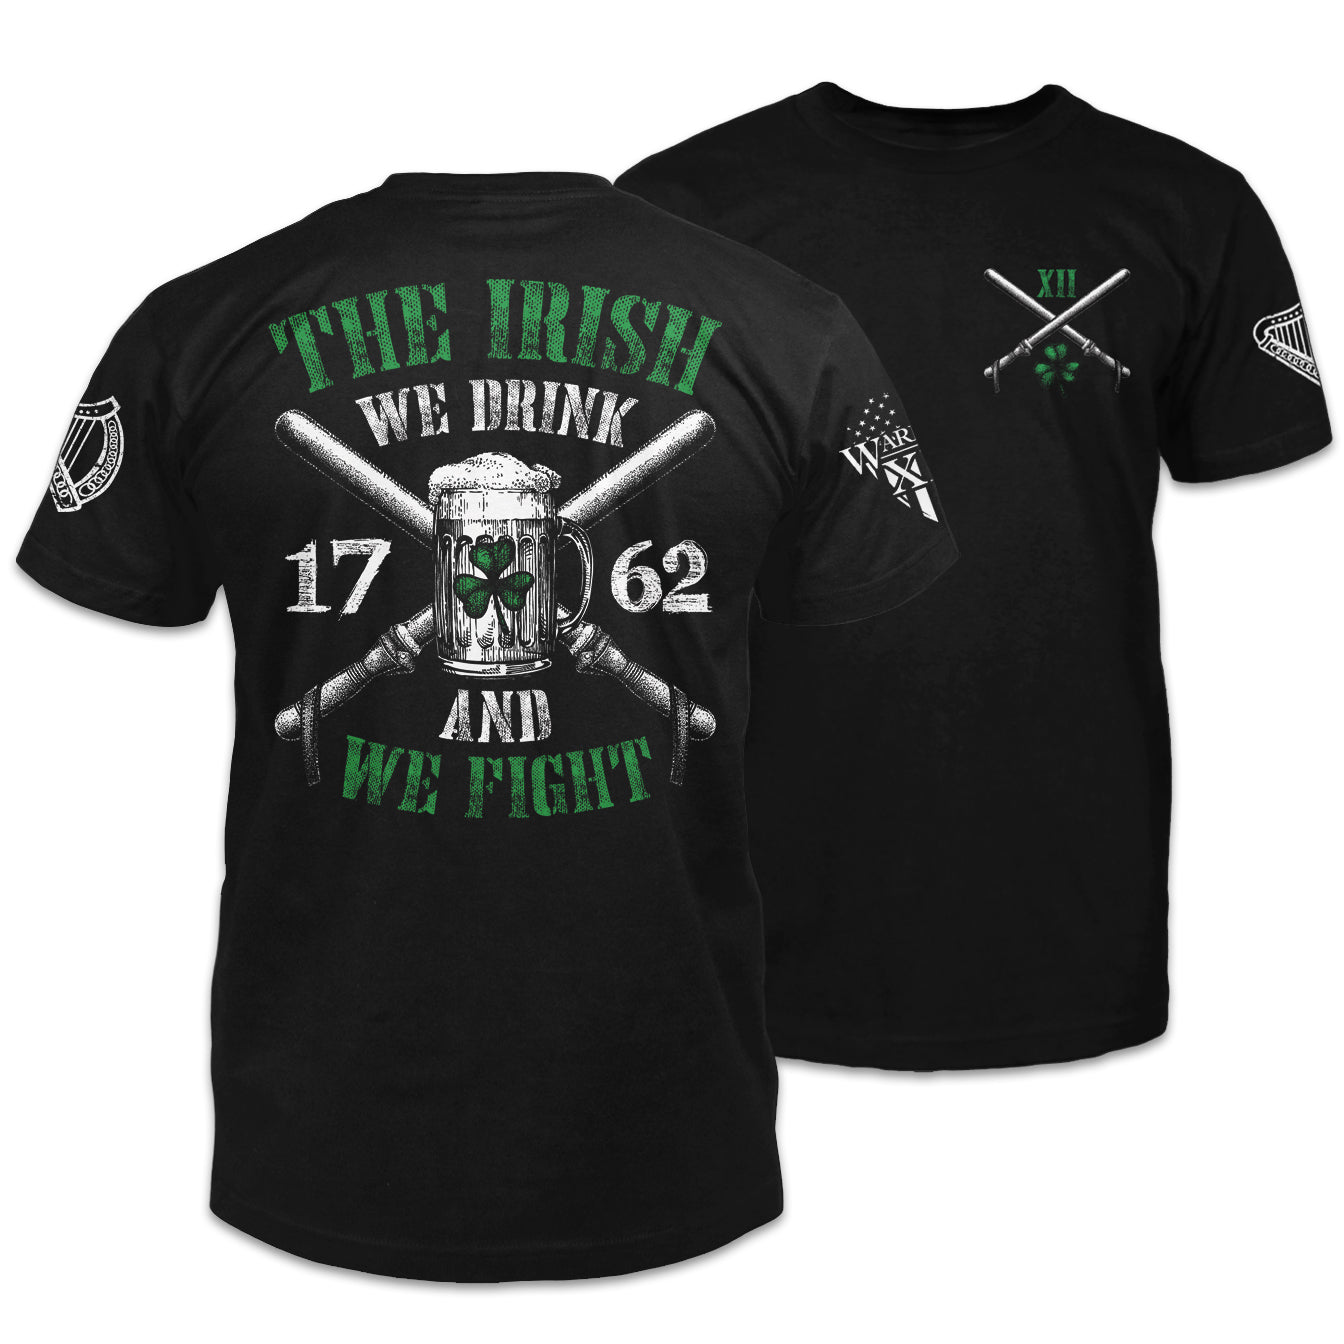 Front and back black t-shirt with the words "The Irish - We Drink And We Fight" with an Irish beer mug printed on the shirt.